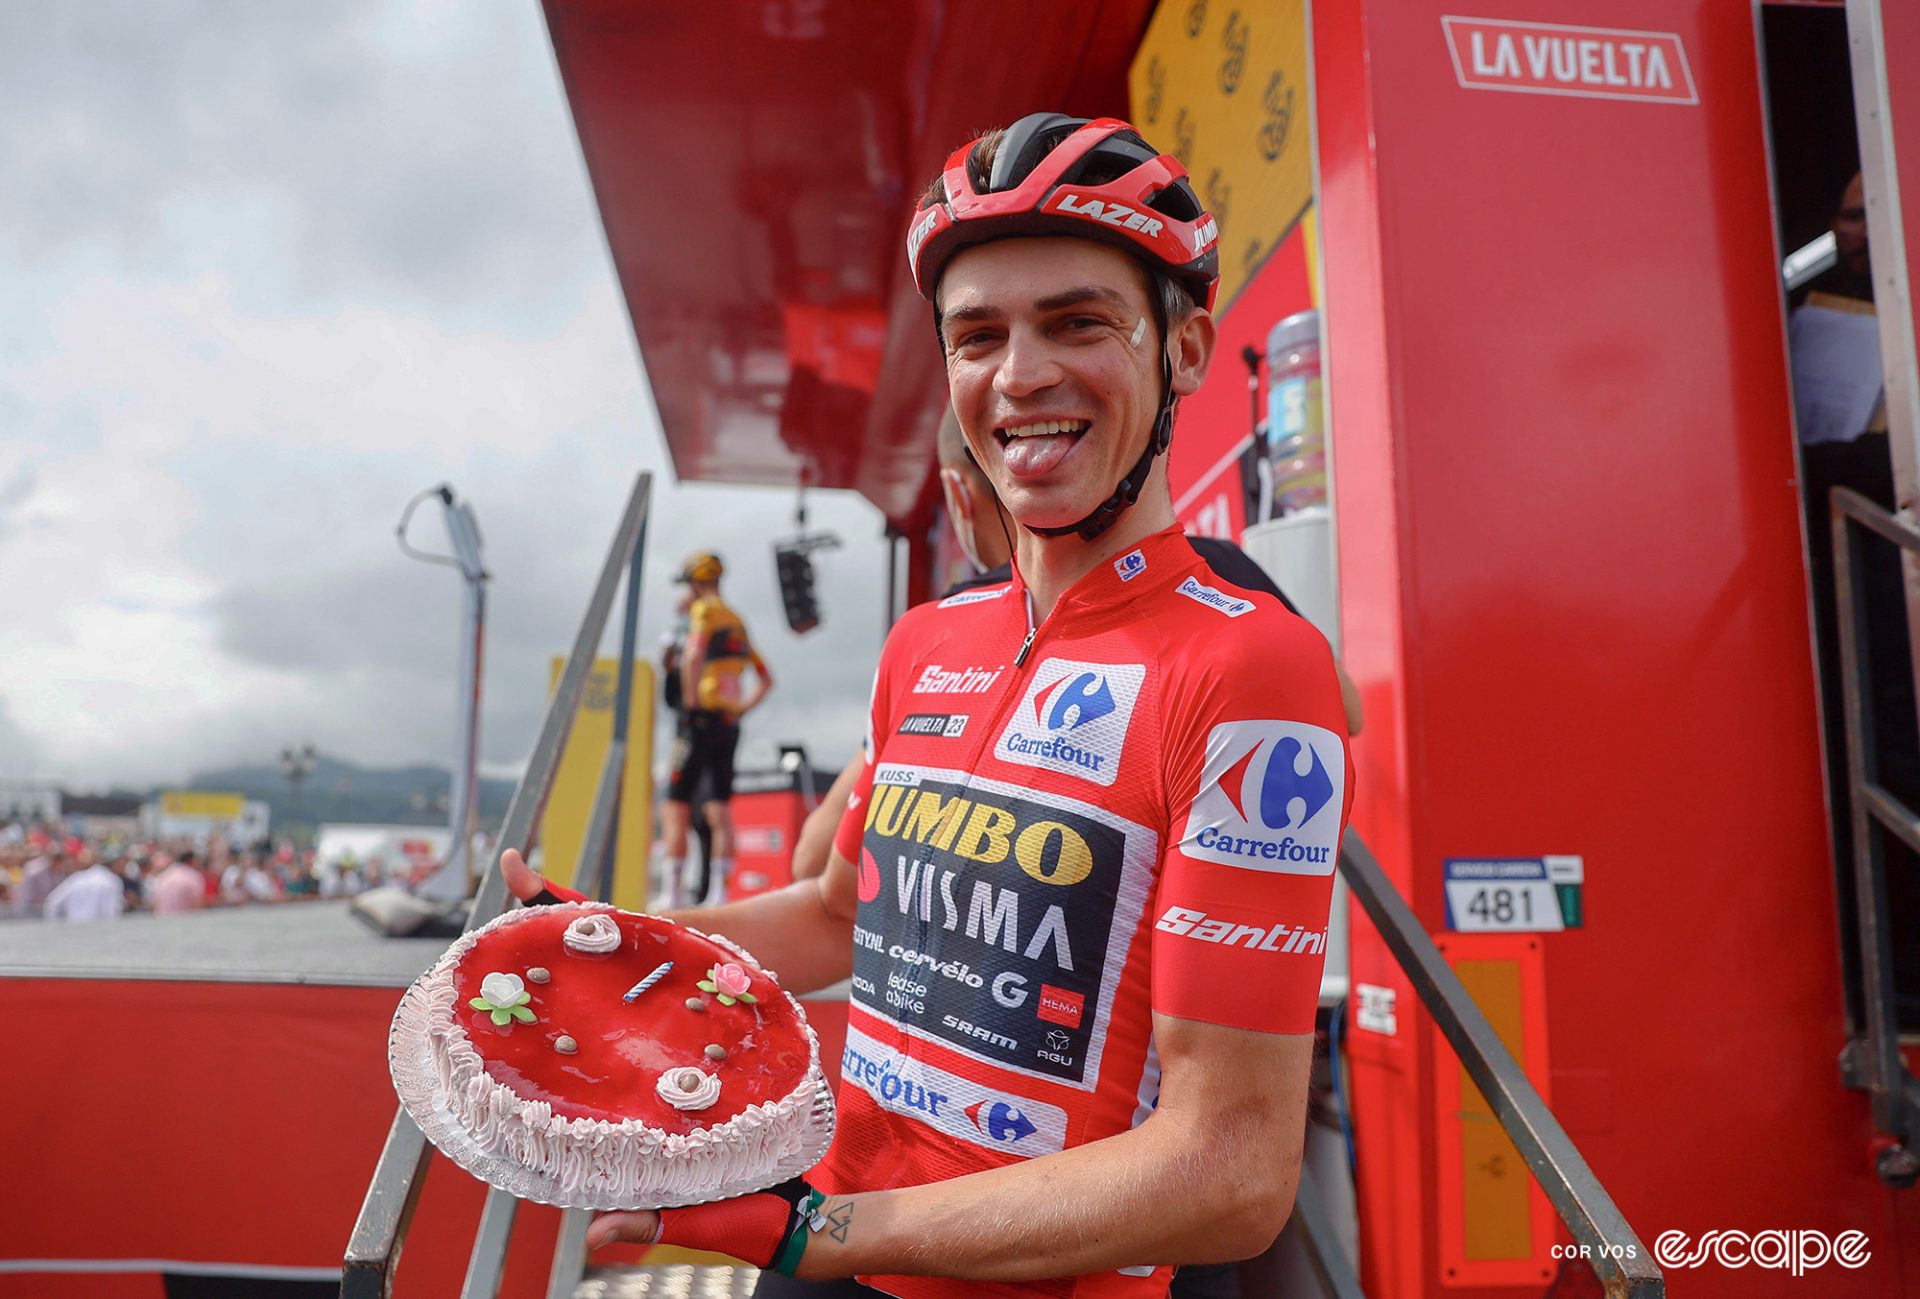 Sepp Kuss smiles, tongue out, holding a birthday cake.